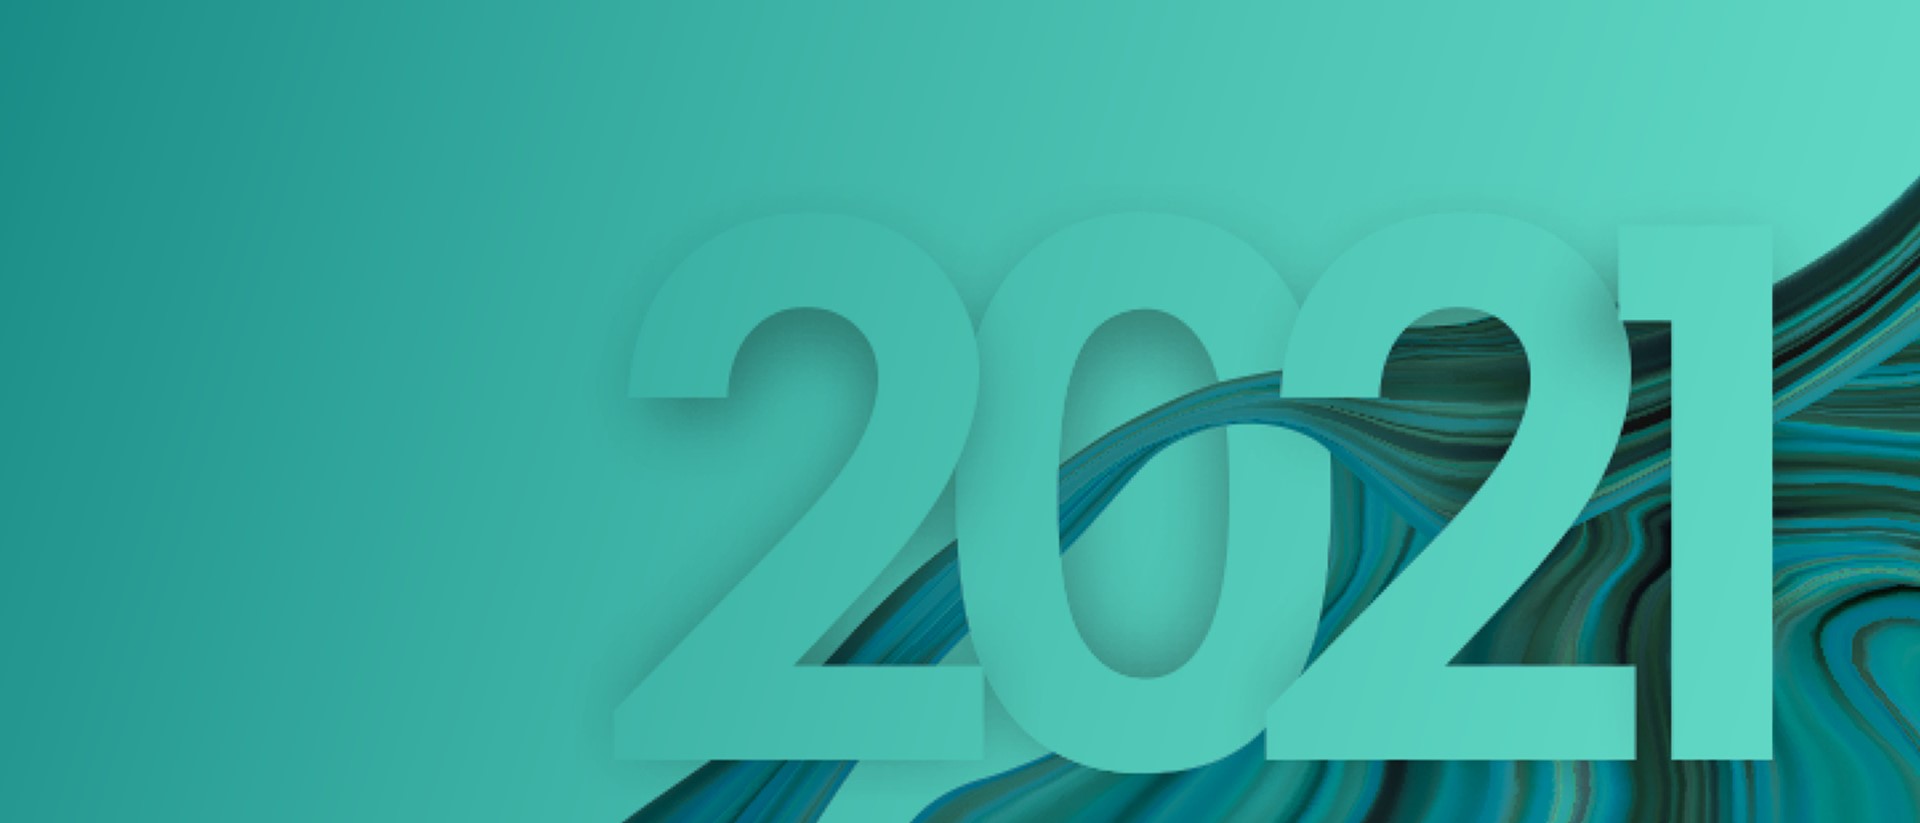 Image of 2021 on a teal background